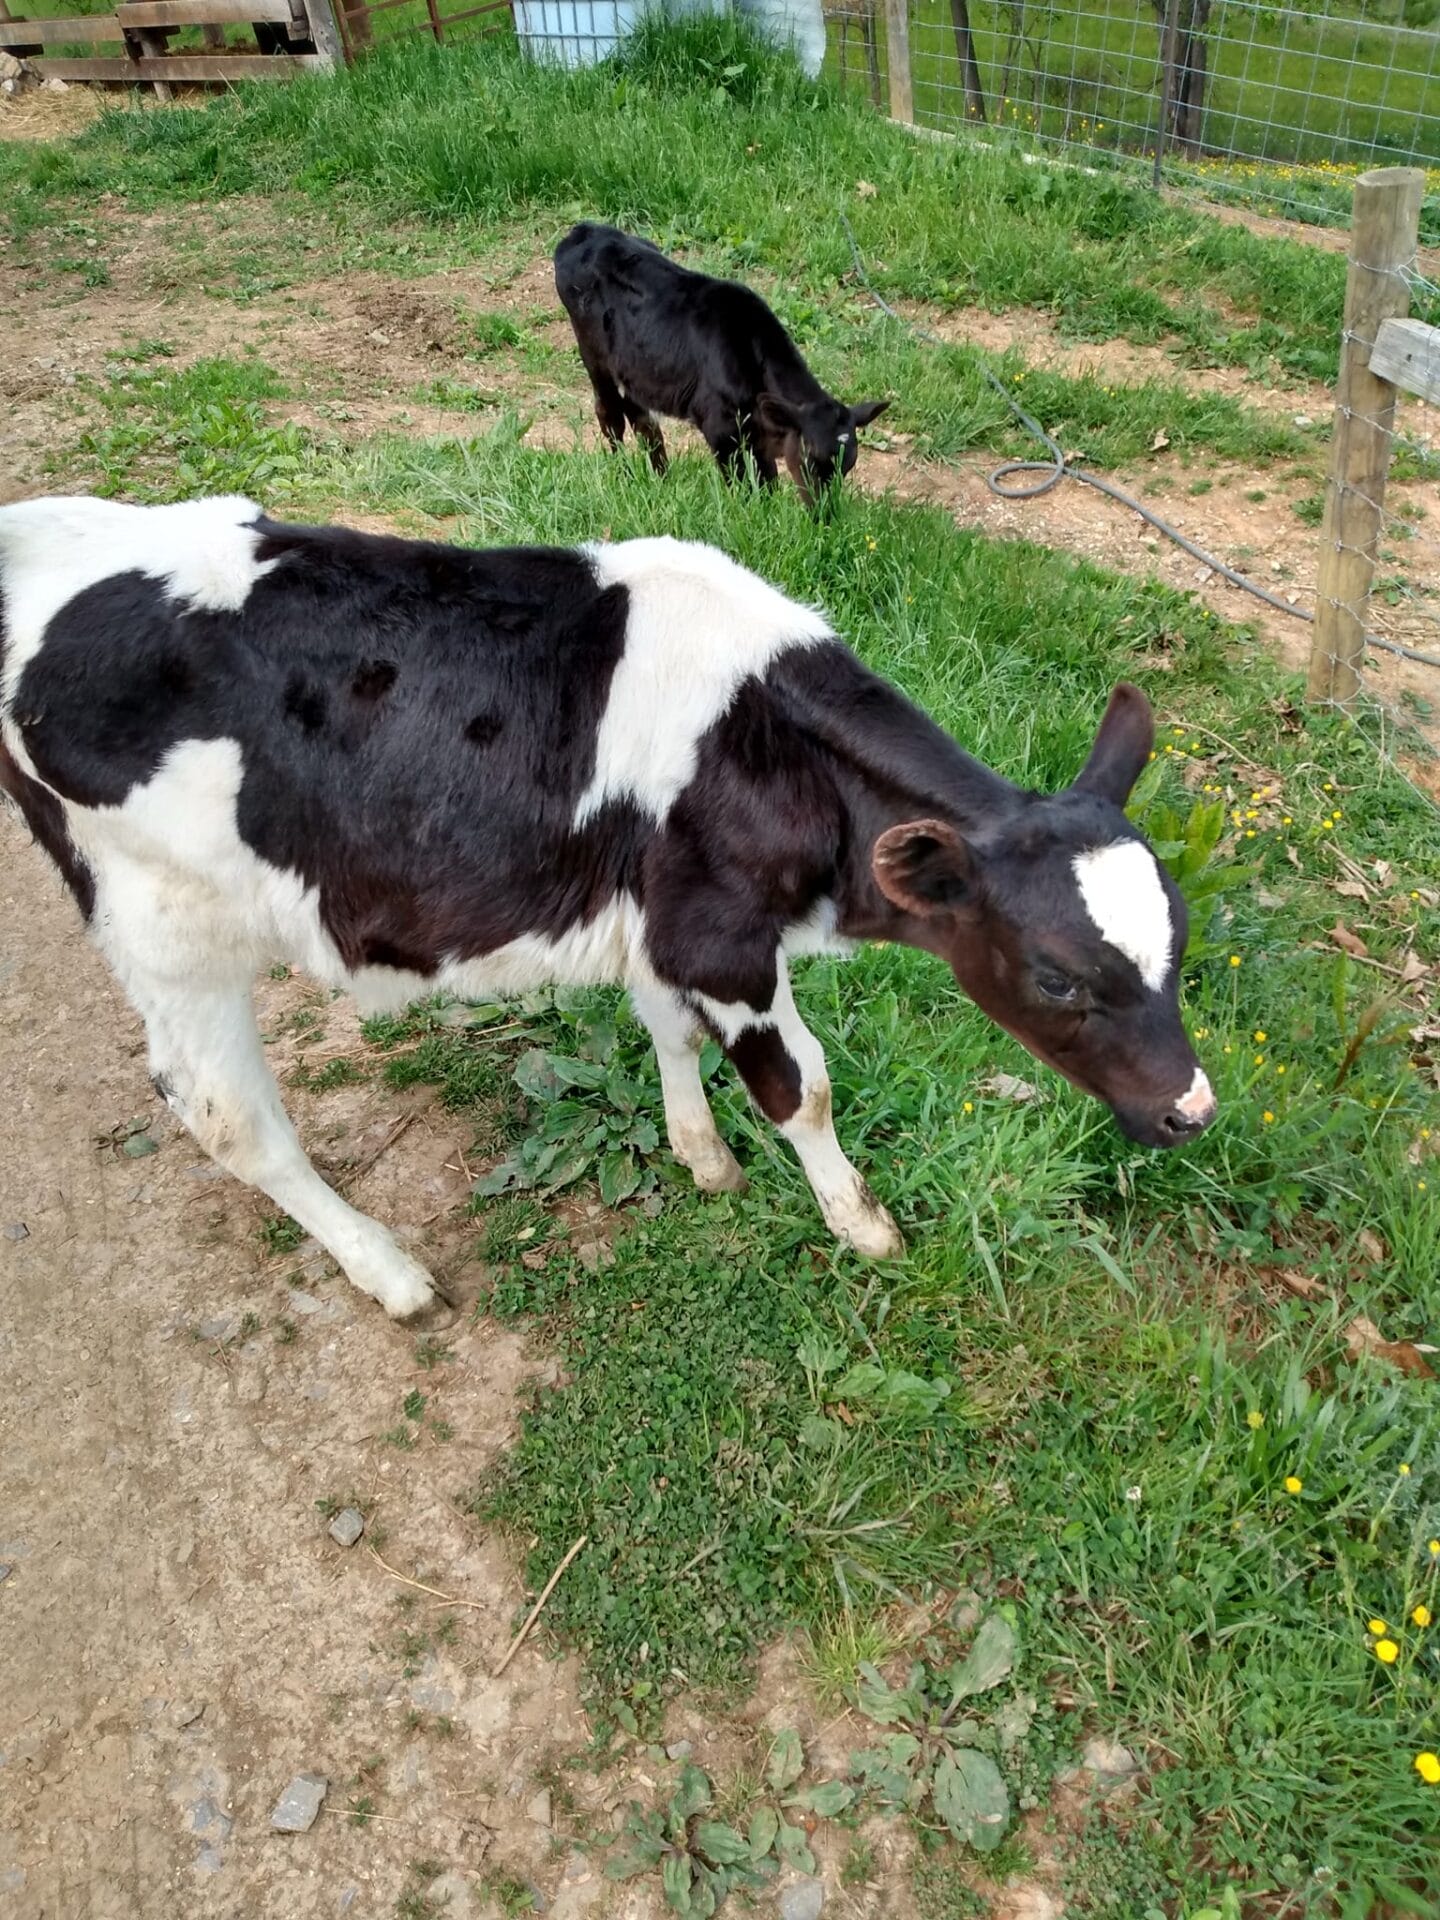 Two baby cows at Nash Creamery in Nickelsville, Virginia.